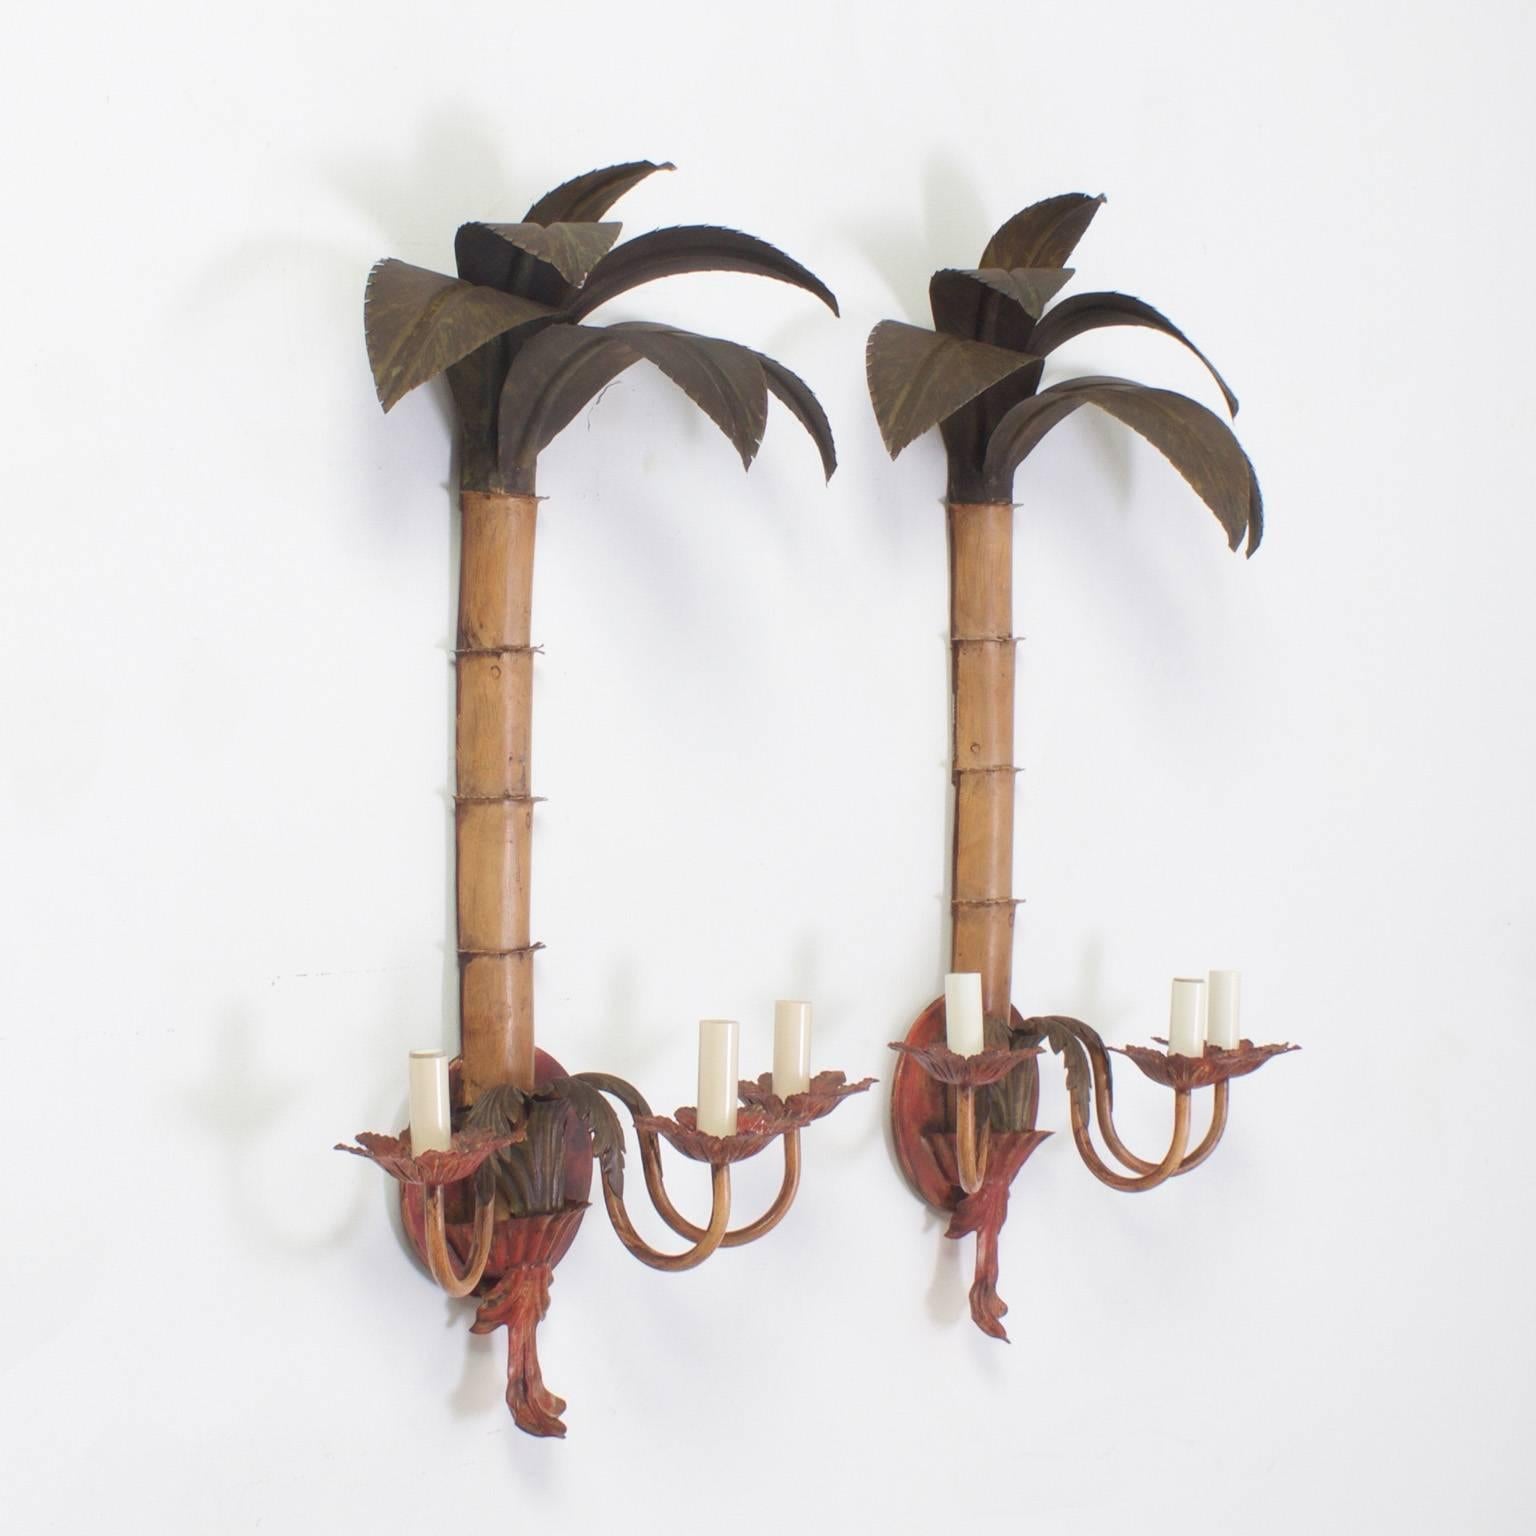 Pair of Mid-Century stylized three-light tole sconces, handcrafted and decorated with muted Mediterranean colors. Perfect for tropical, island or coastal living, or any interior that deserves a bit of whimsy. Newly wired.
Please check out our other